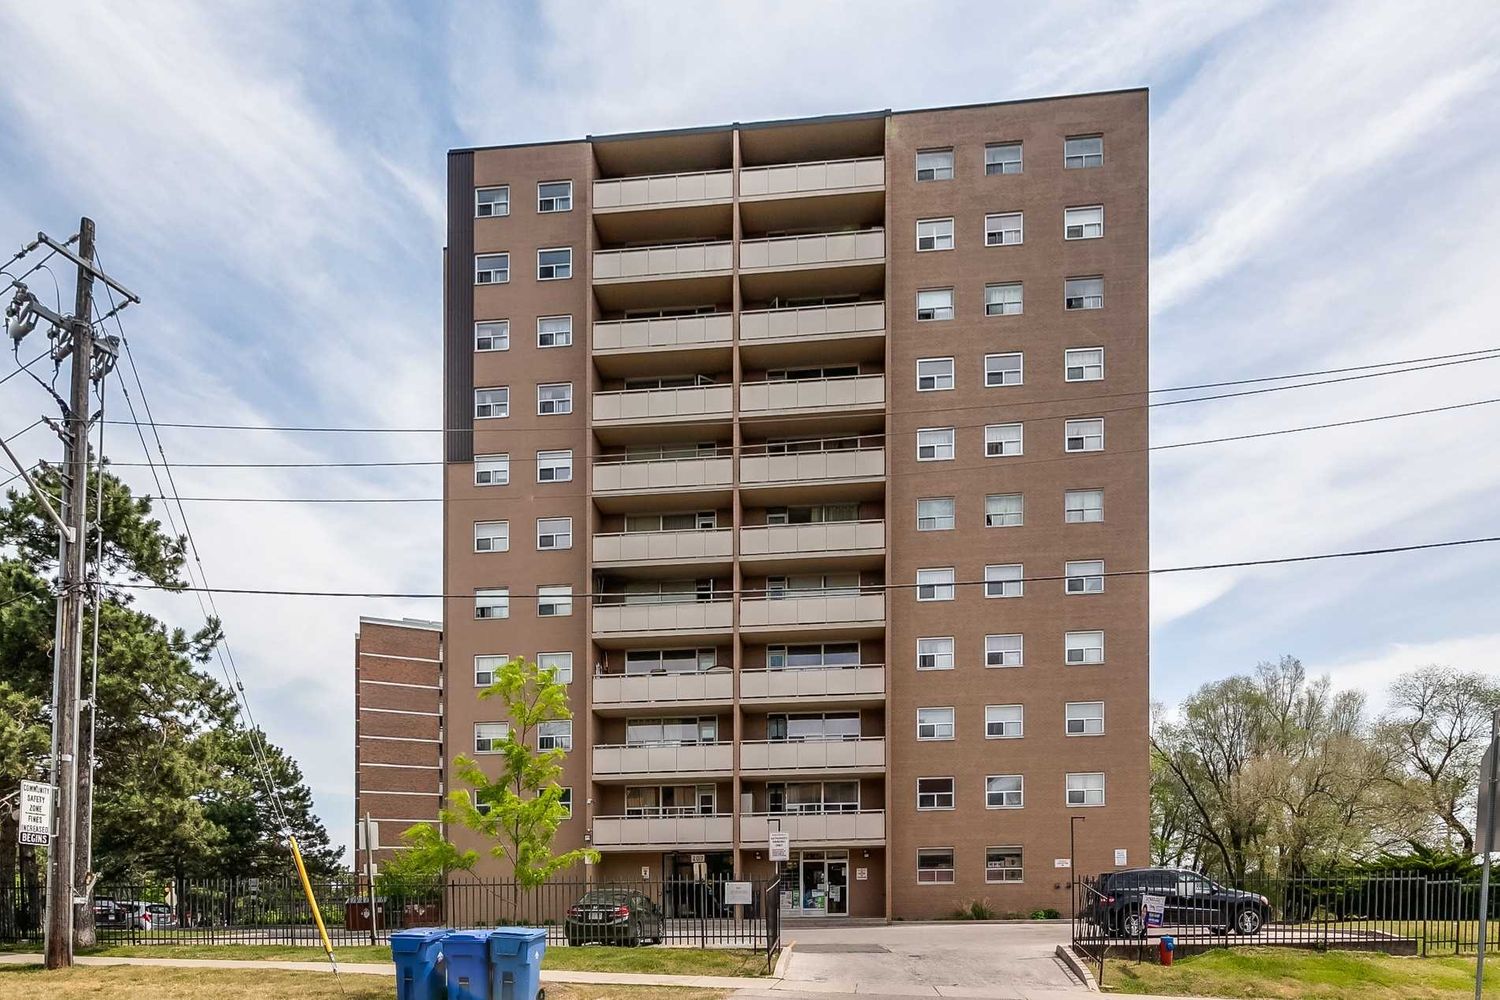 207 Galloway Road. 207 Galloway Road Condos is located in  Scarborough, Toronto - image #1 of 2